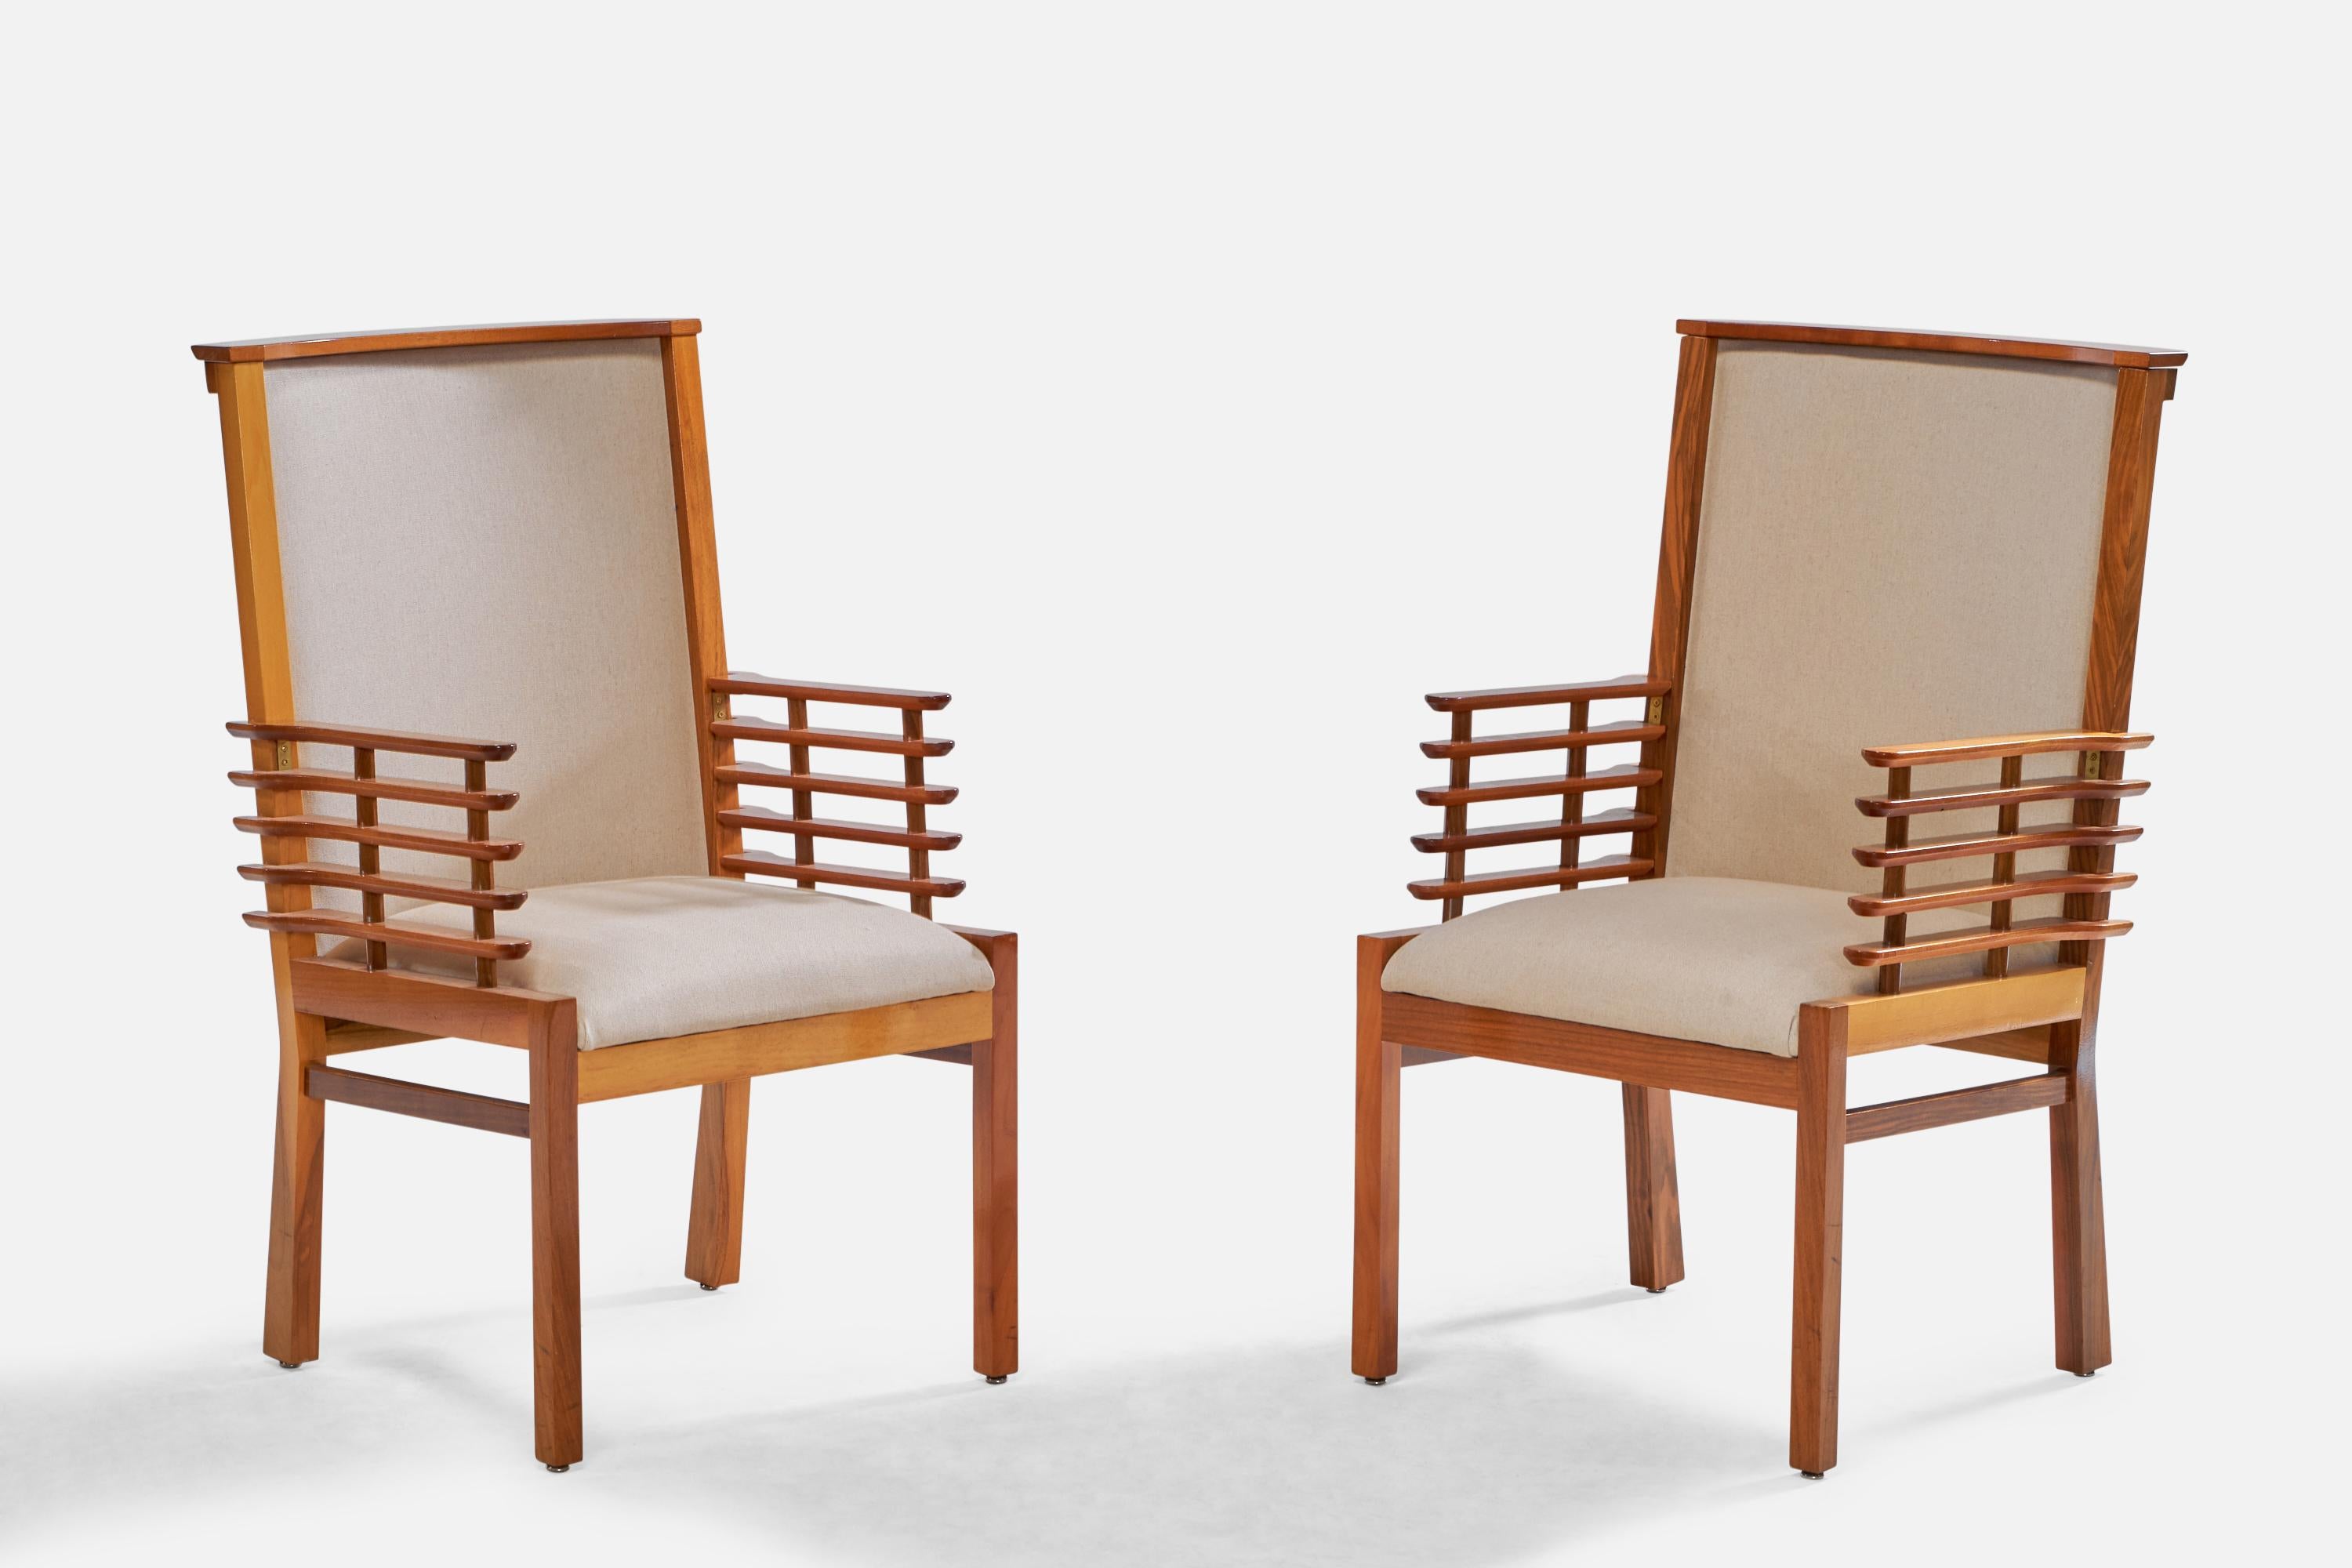 A pair of walnut and off-white fabric armchair designed and produced in Finland, 1950s. 

Provenance: Helsingin Puhelinyhdistys

Seat height: 19.5”
